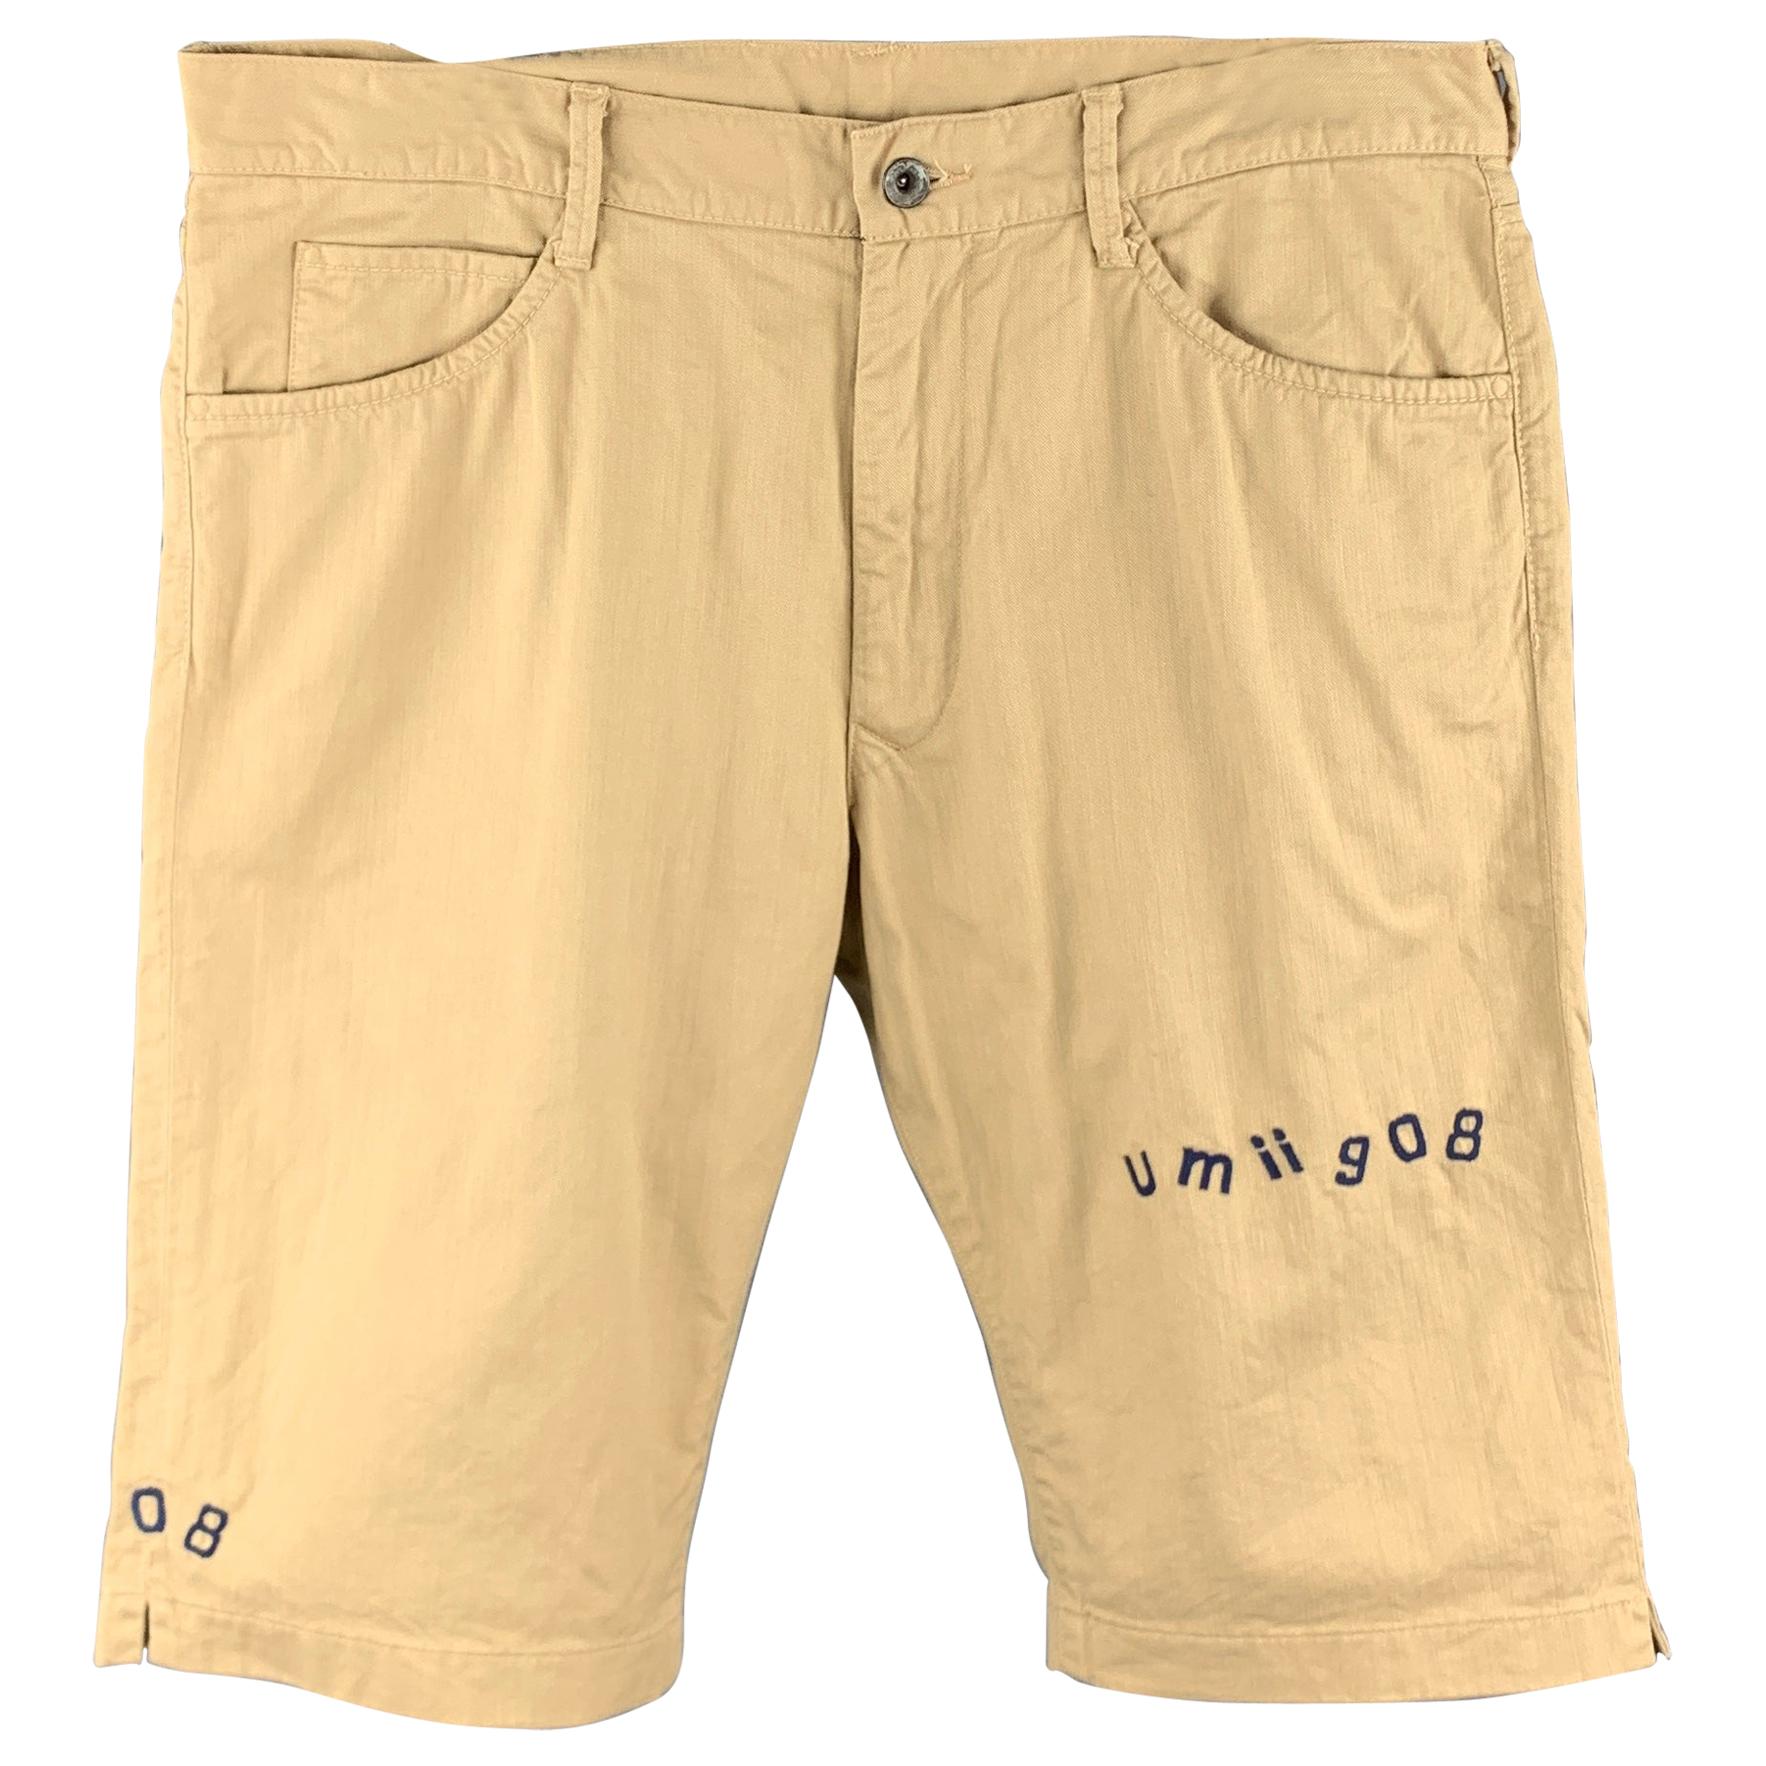 45rpm Size 34 Khaki Cotton Zip Fly Solid Shorts